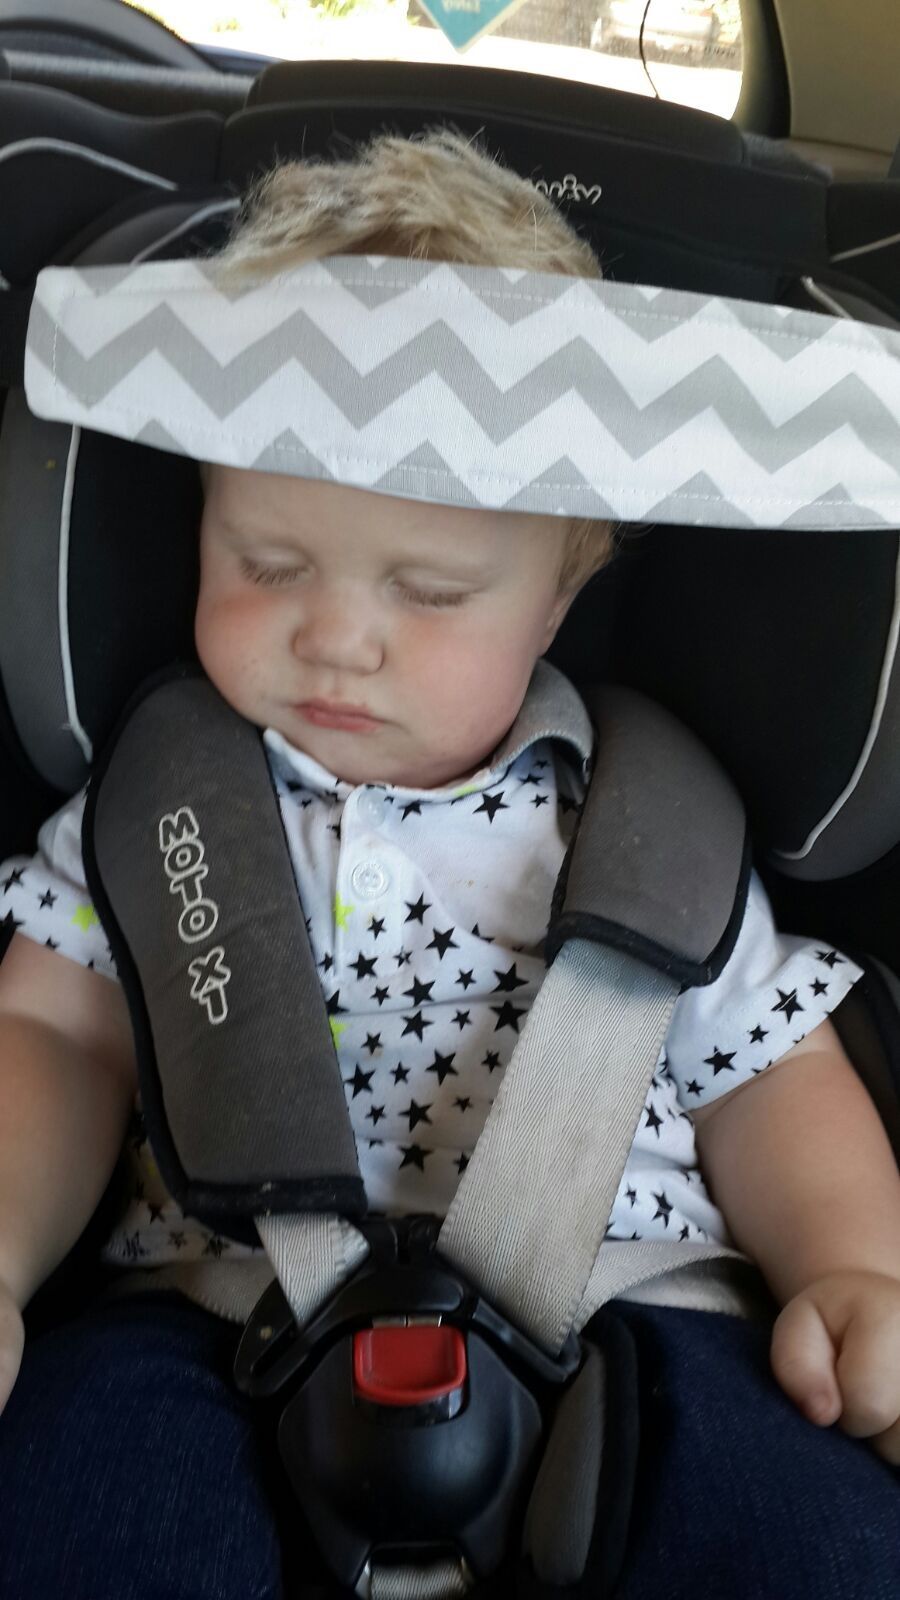 Car Seat Head Support Safety: How to Safely Position Your Baby's Head -  Safe Convertible Car Seats